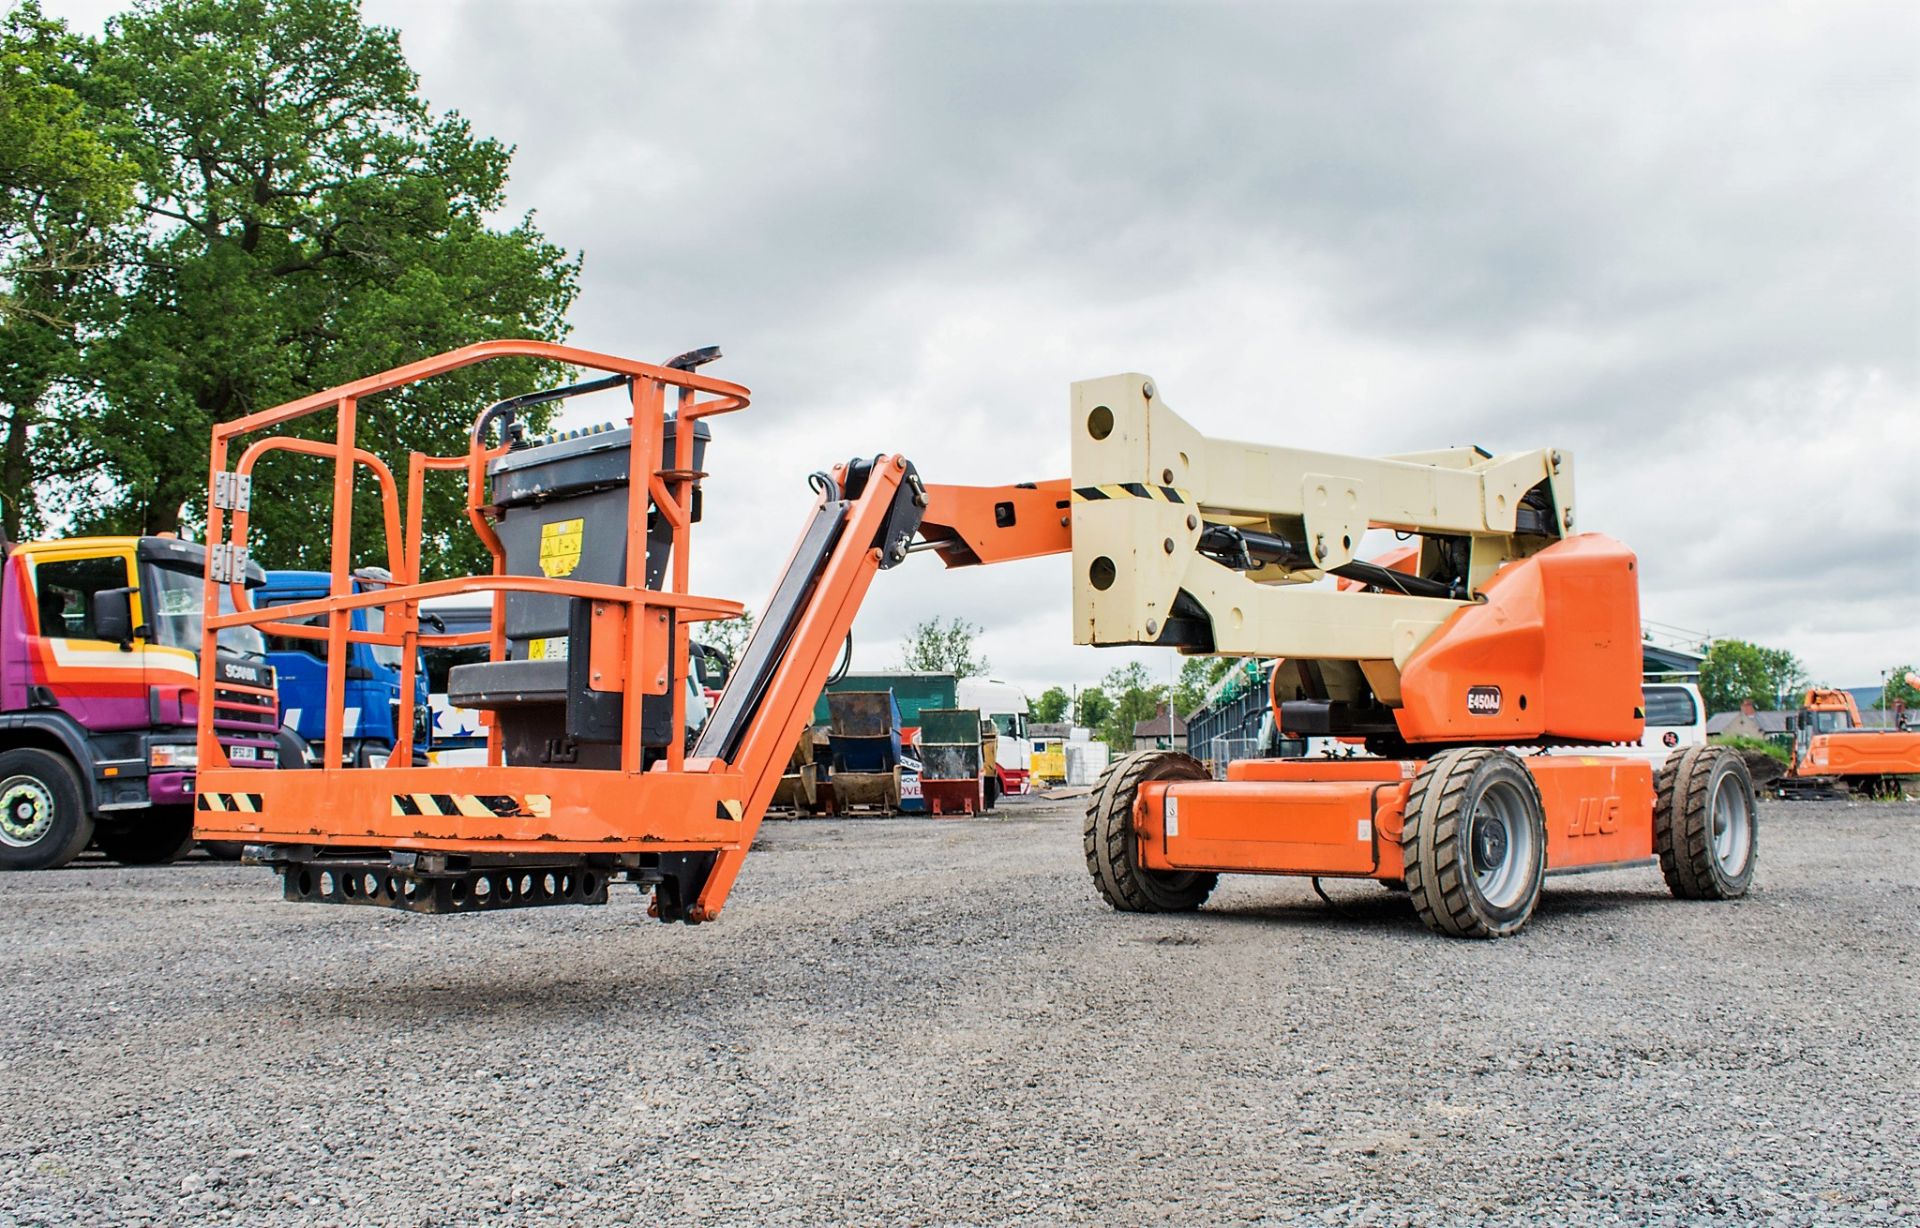 JLG E450AJ battery electric articulated boom access platform Year: 2014 S/N: 189435 Recorded